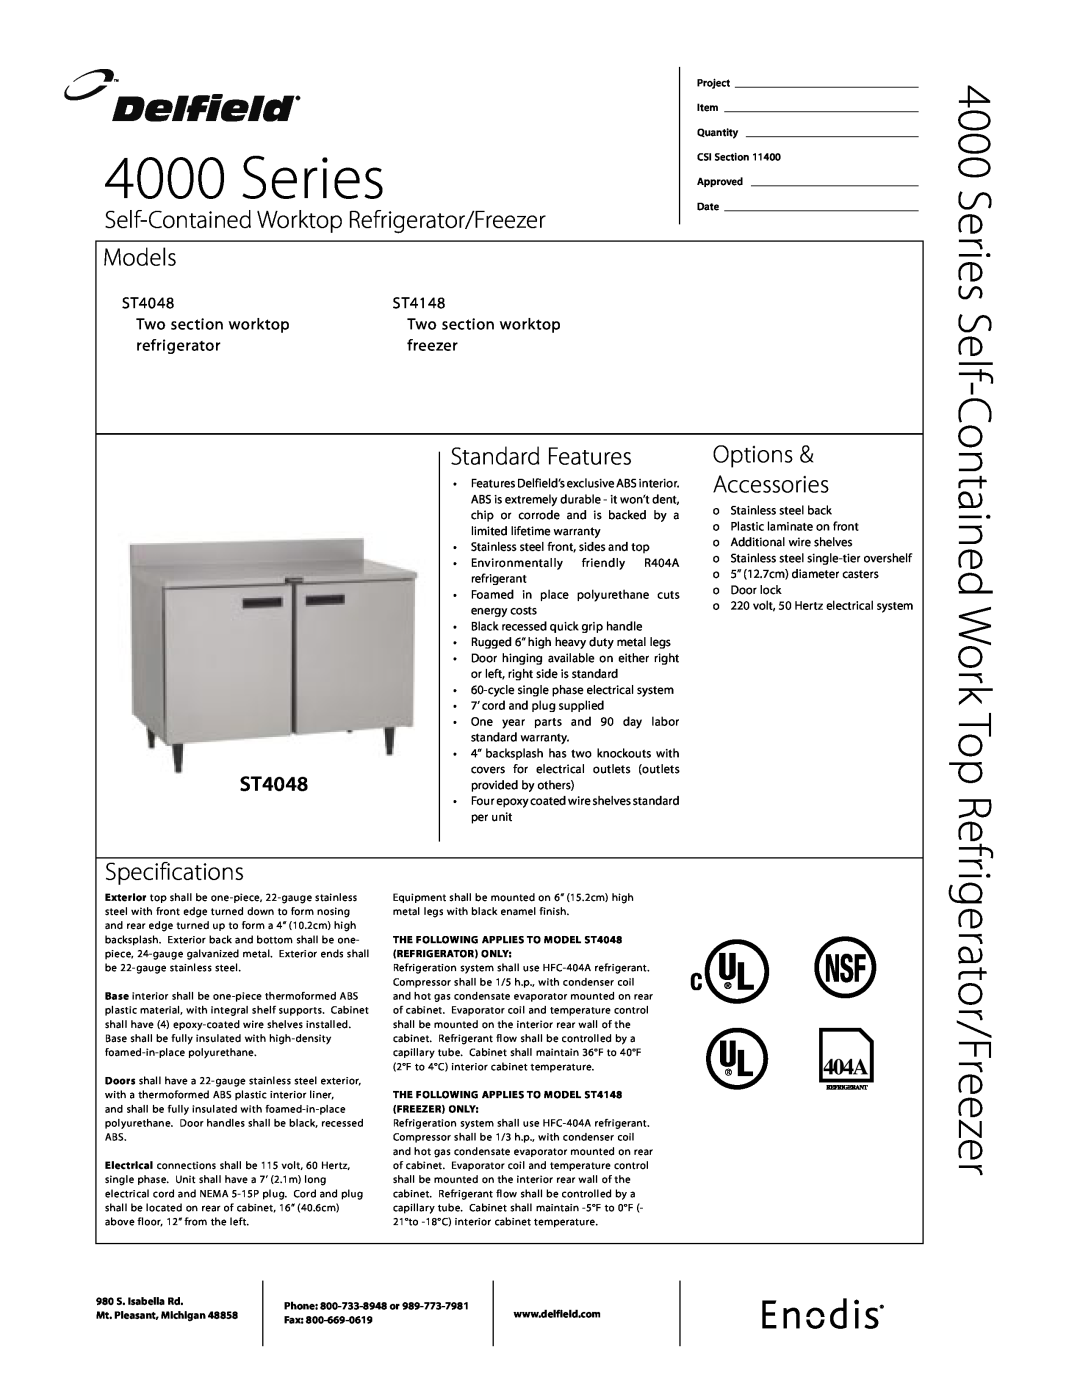 Delfield ST4048 specifications ST4148, Two section worktop, refrigerator, freezer, Series Self, Models, Specifications 